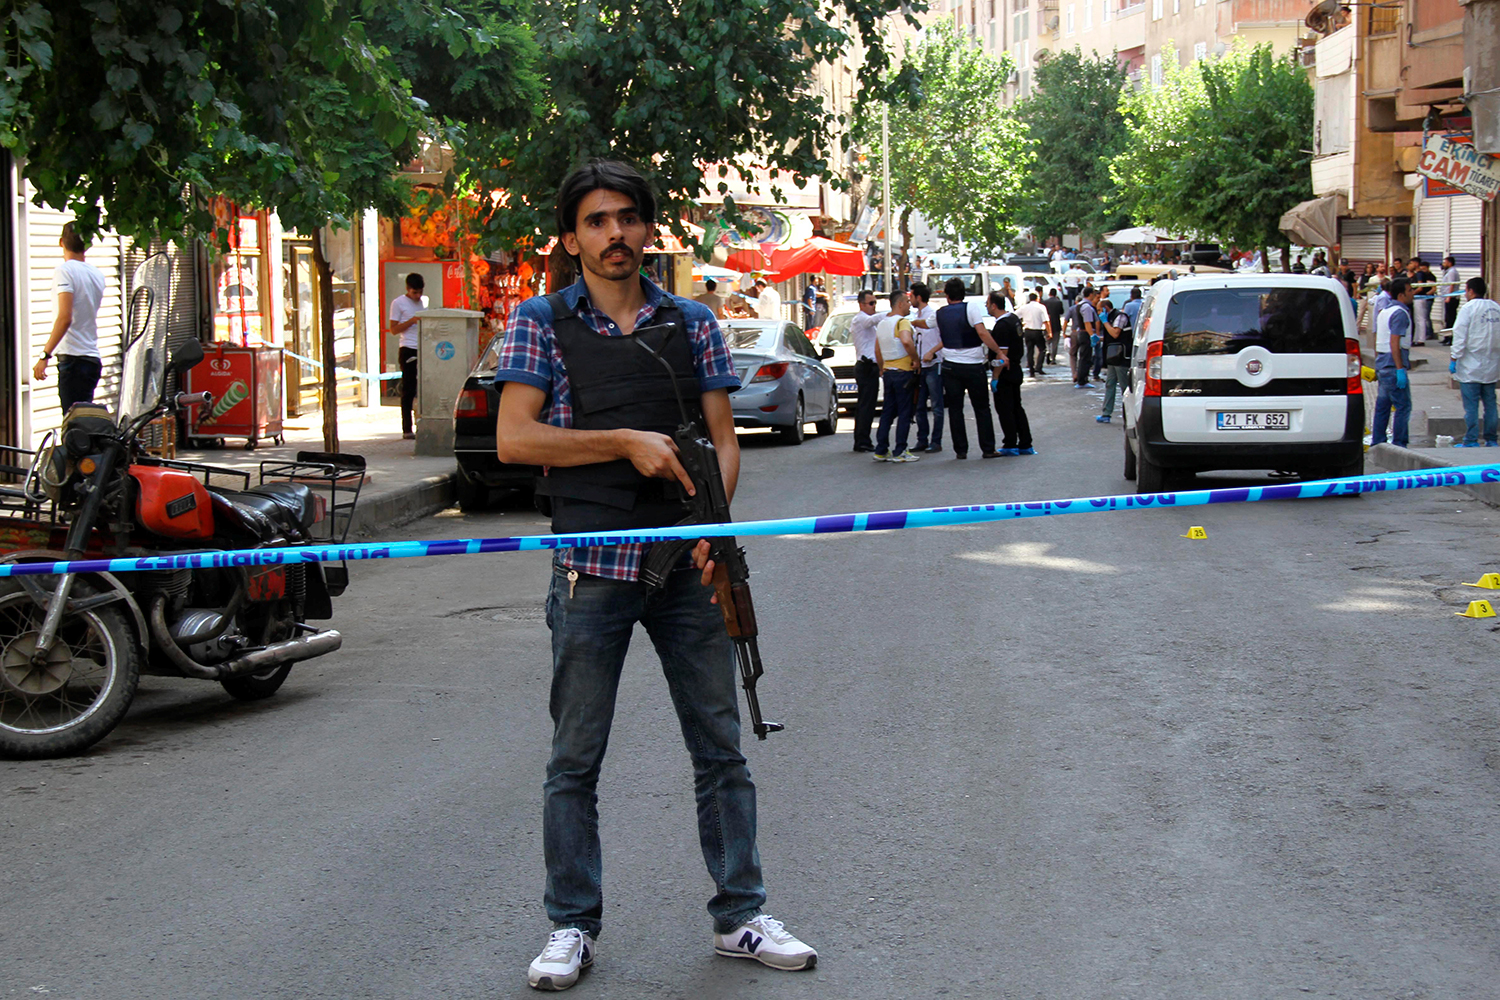 Two Turkish anti-ISIL activists found decapitated in an apartment